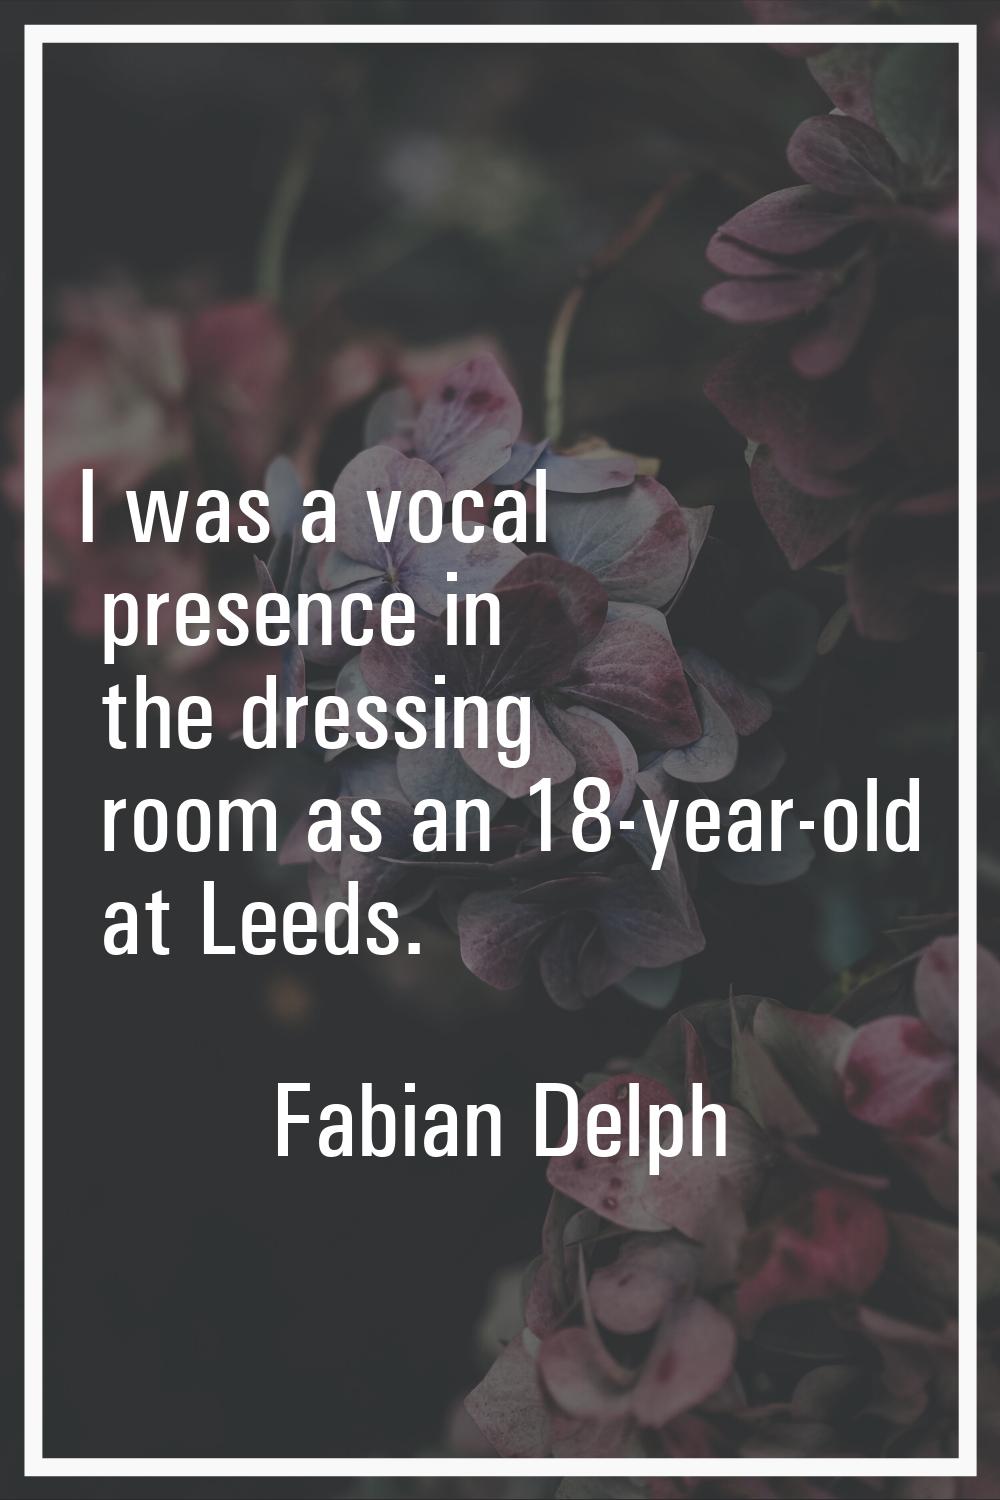 I was a vocal presence in the dressing room as an 18-year-old at Leeds.